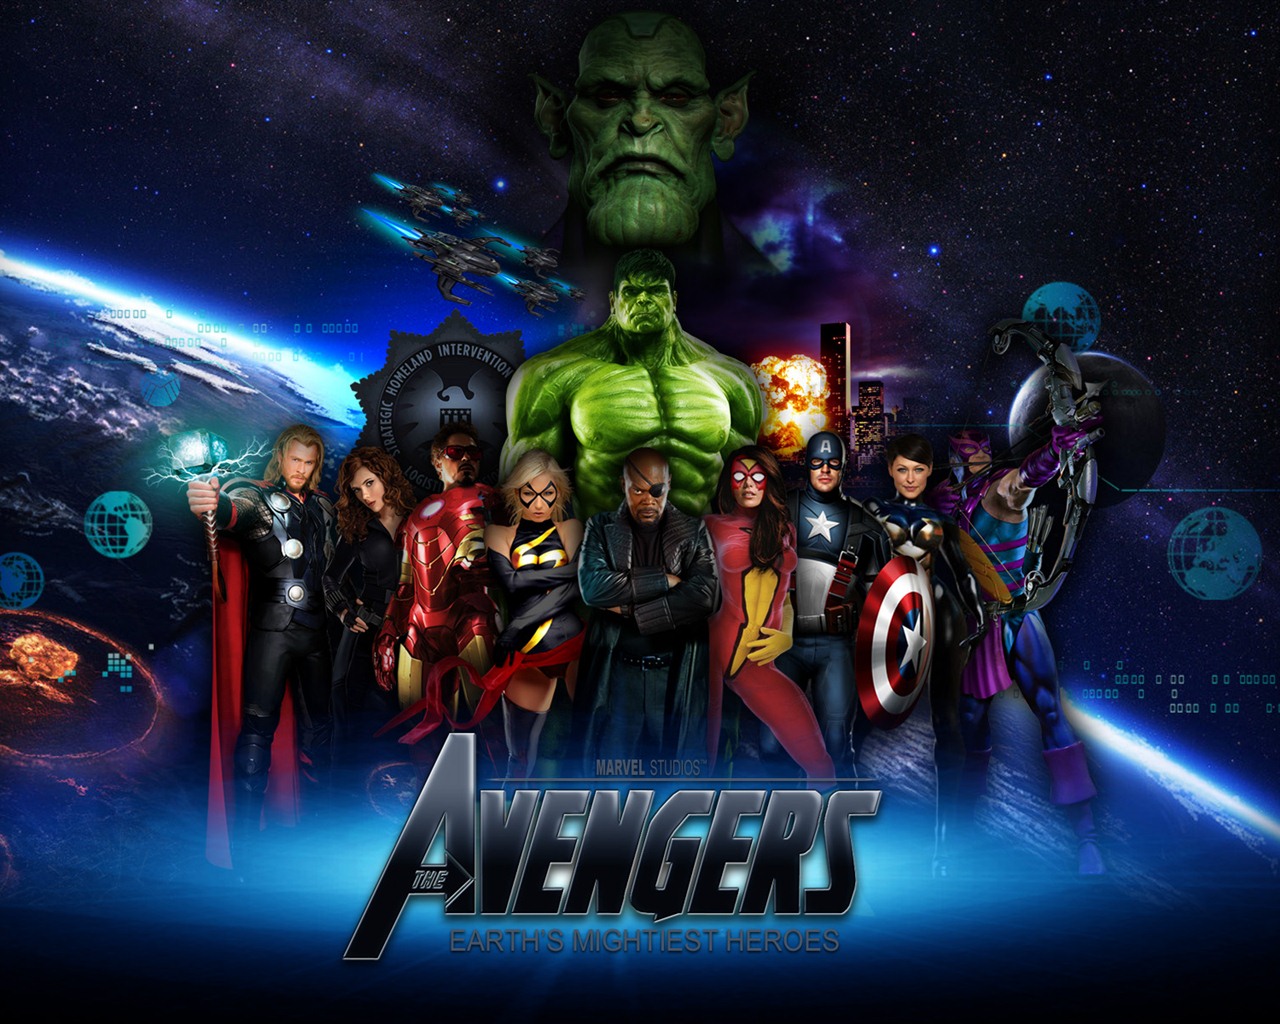 The Avengers 2012 HD wallpapers #12 - 1280x1024